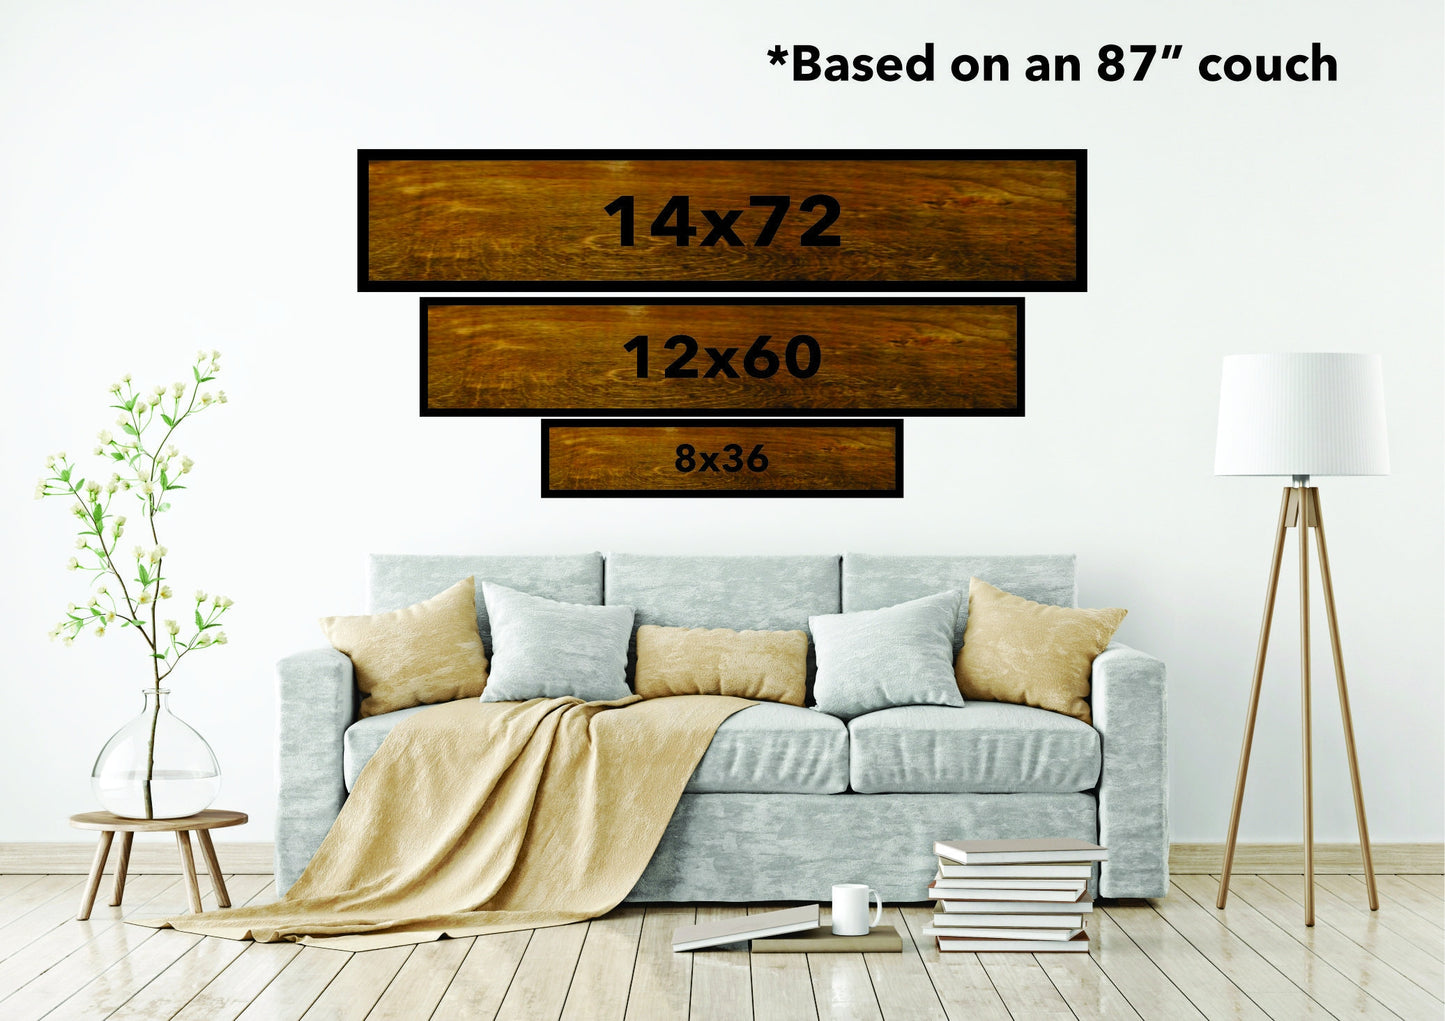 Inspiring Quote Sign Make today amazing Large family sign wood fireplace living room dinning room shabby cottage chic farmhouse rustic decor